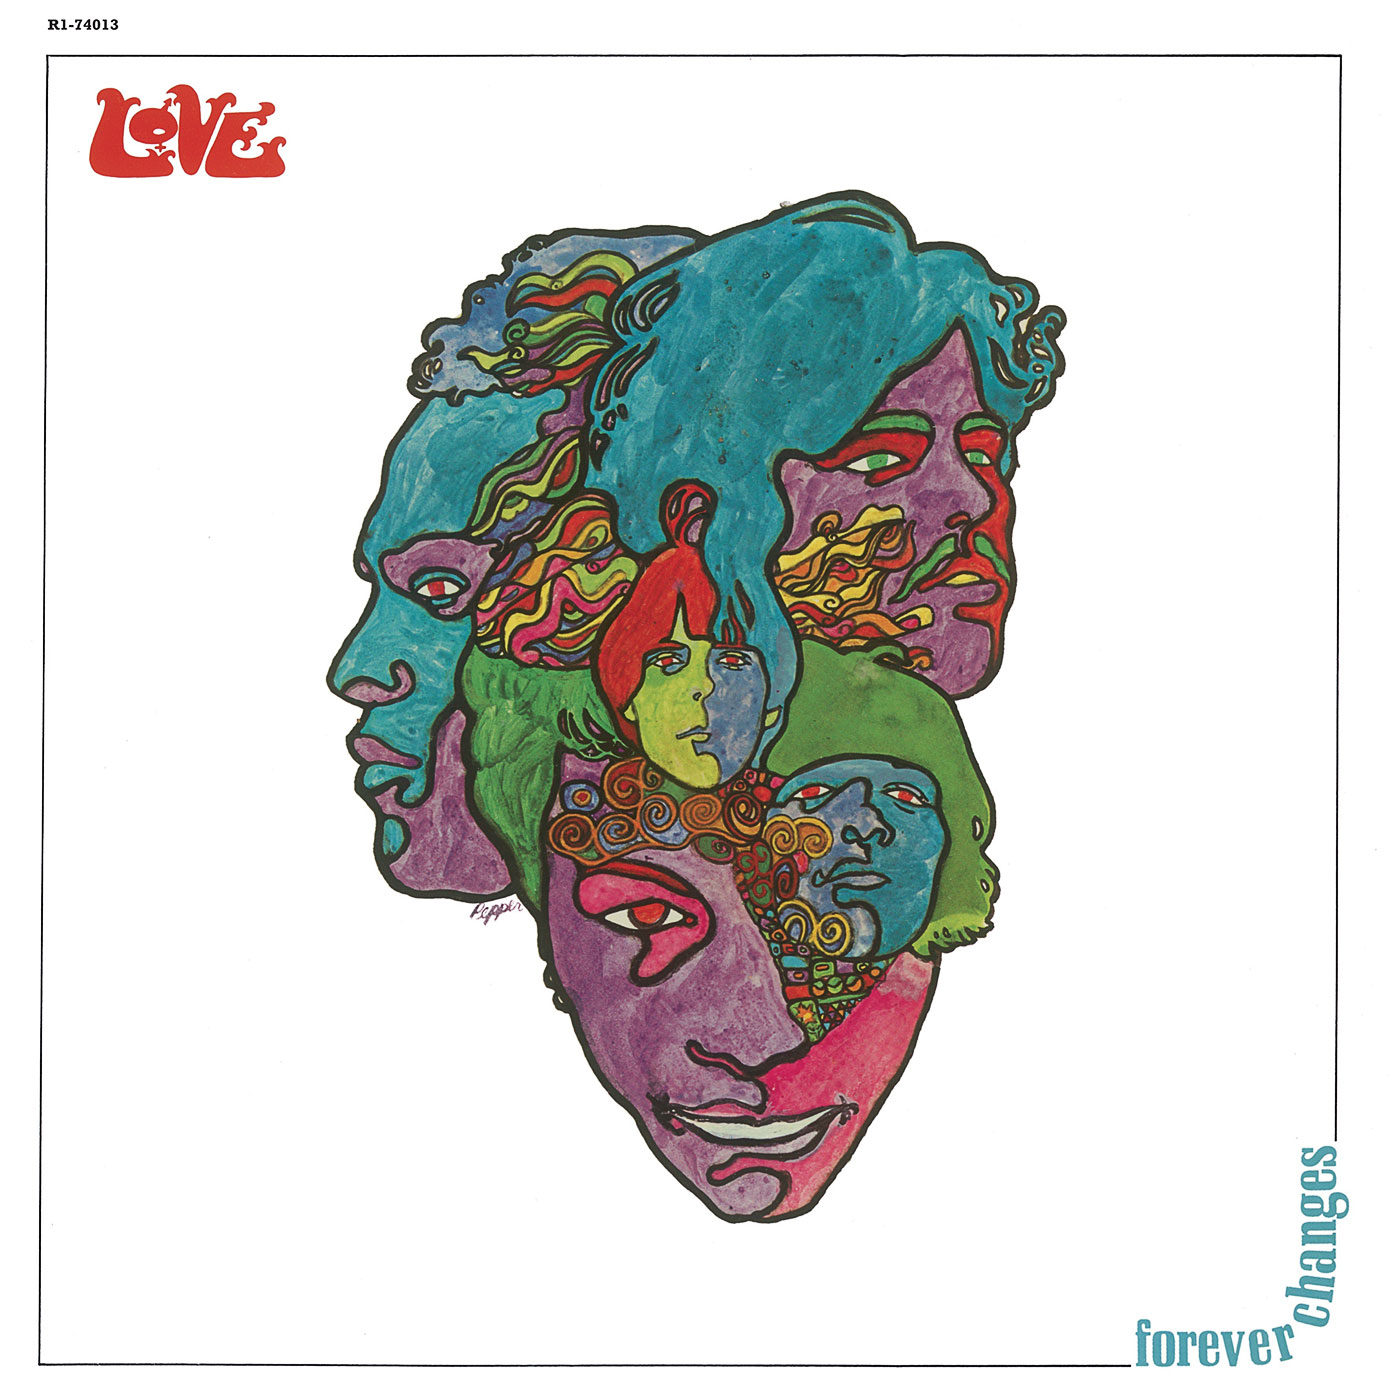 087 Love – Forever Changes